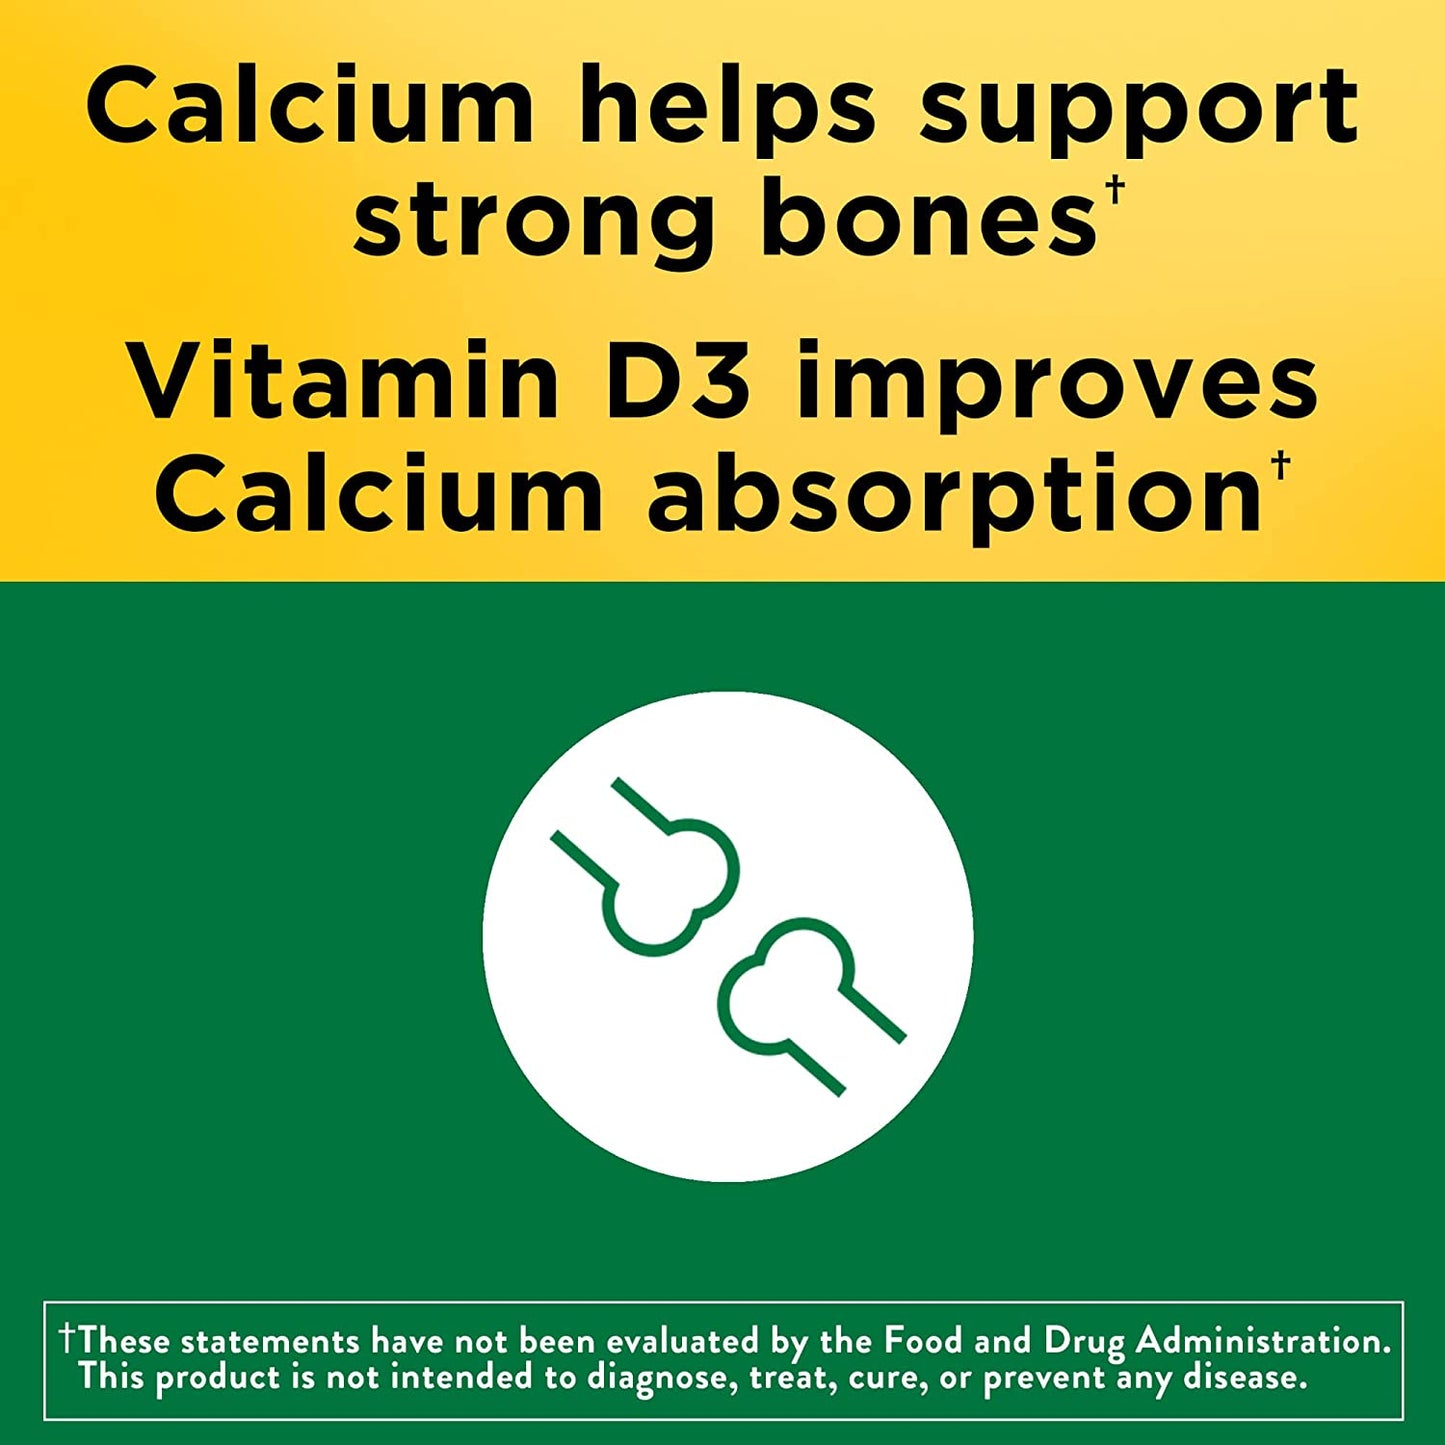 Nature Made Calcium 600 mg with Vitamin D3, Dietary Supplement for Bone Support, 220 Tablets